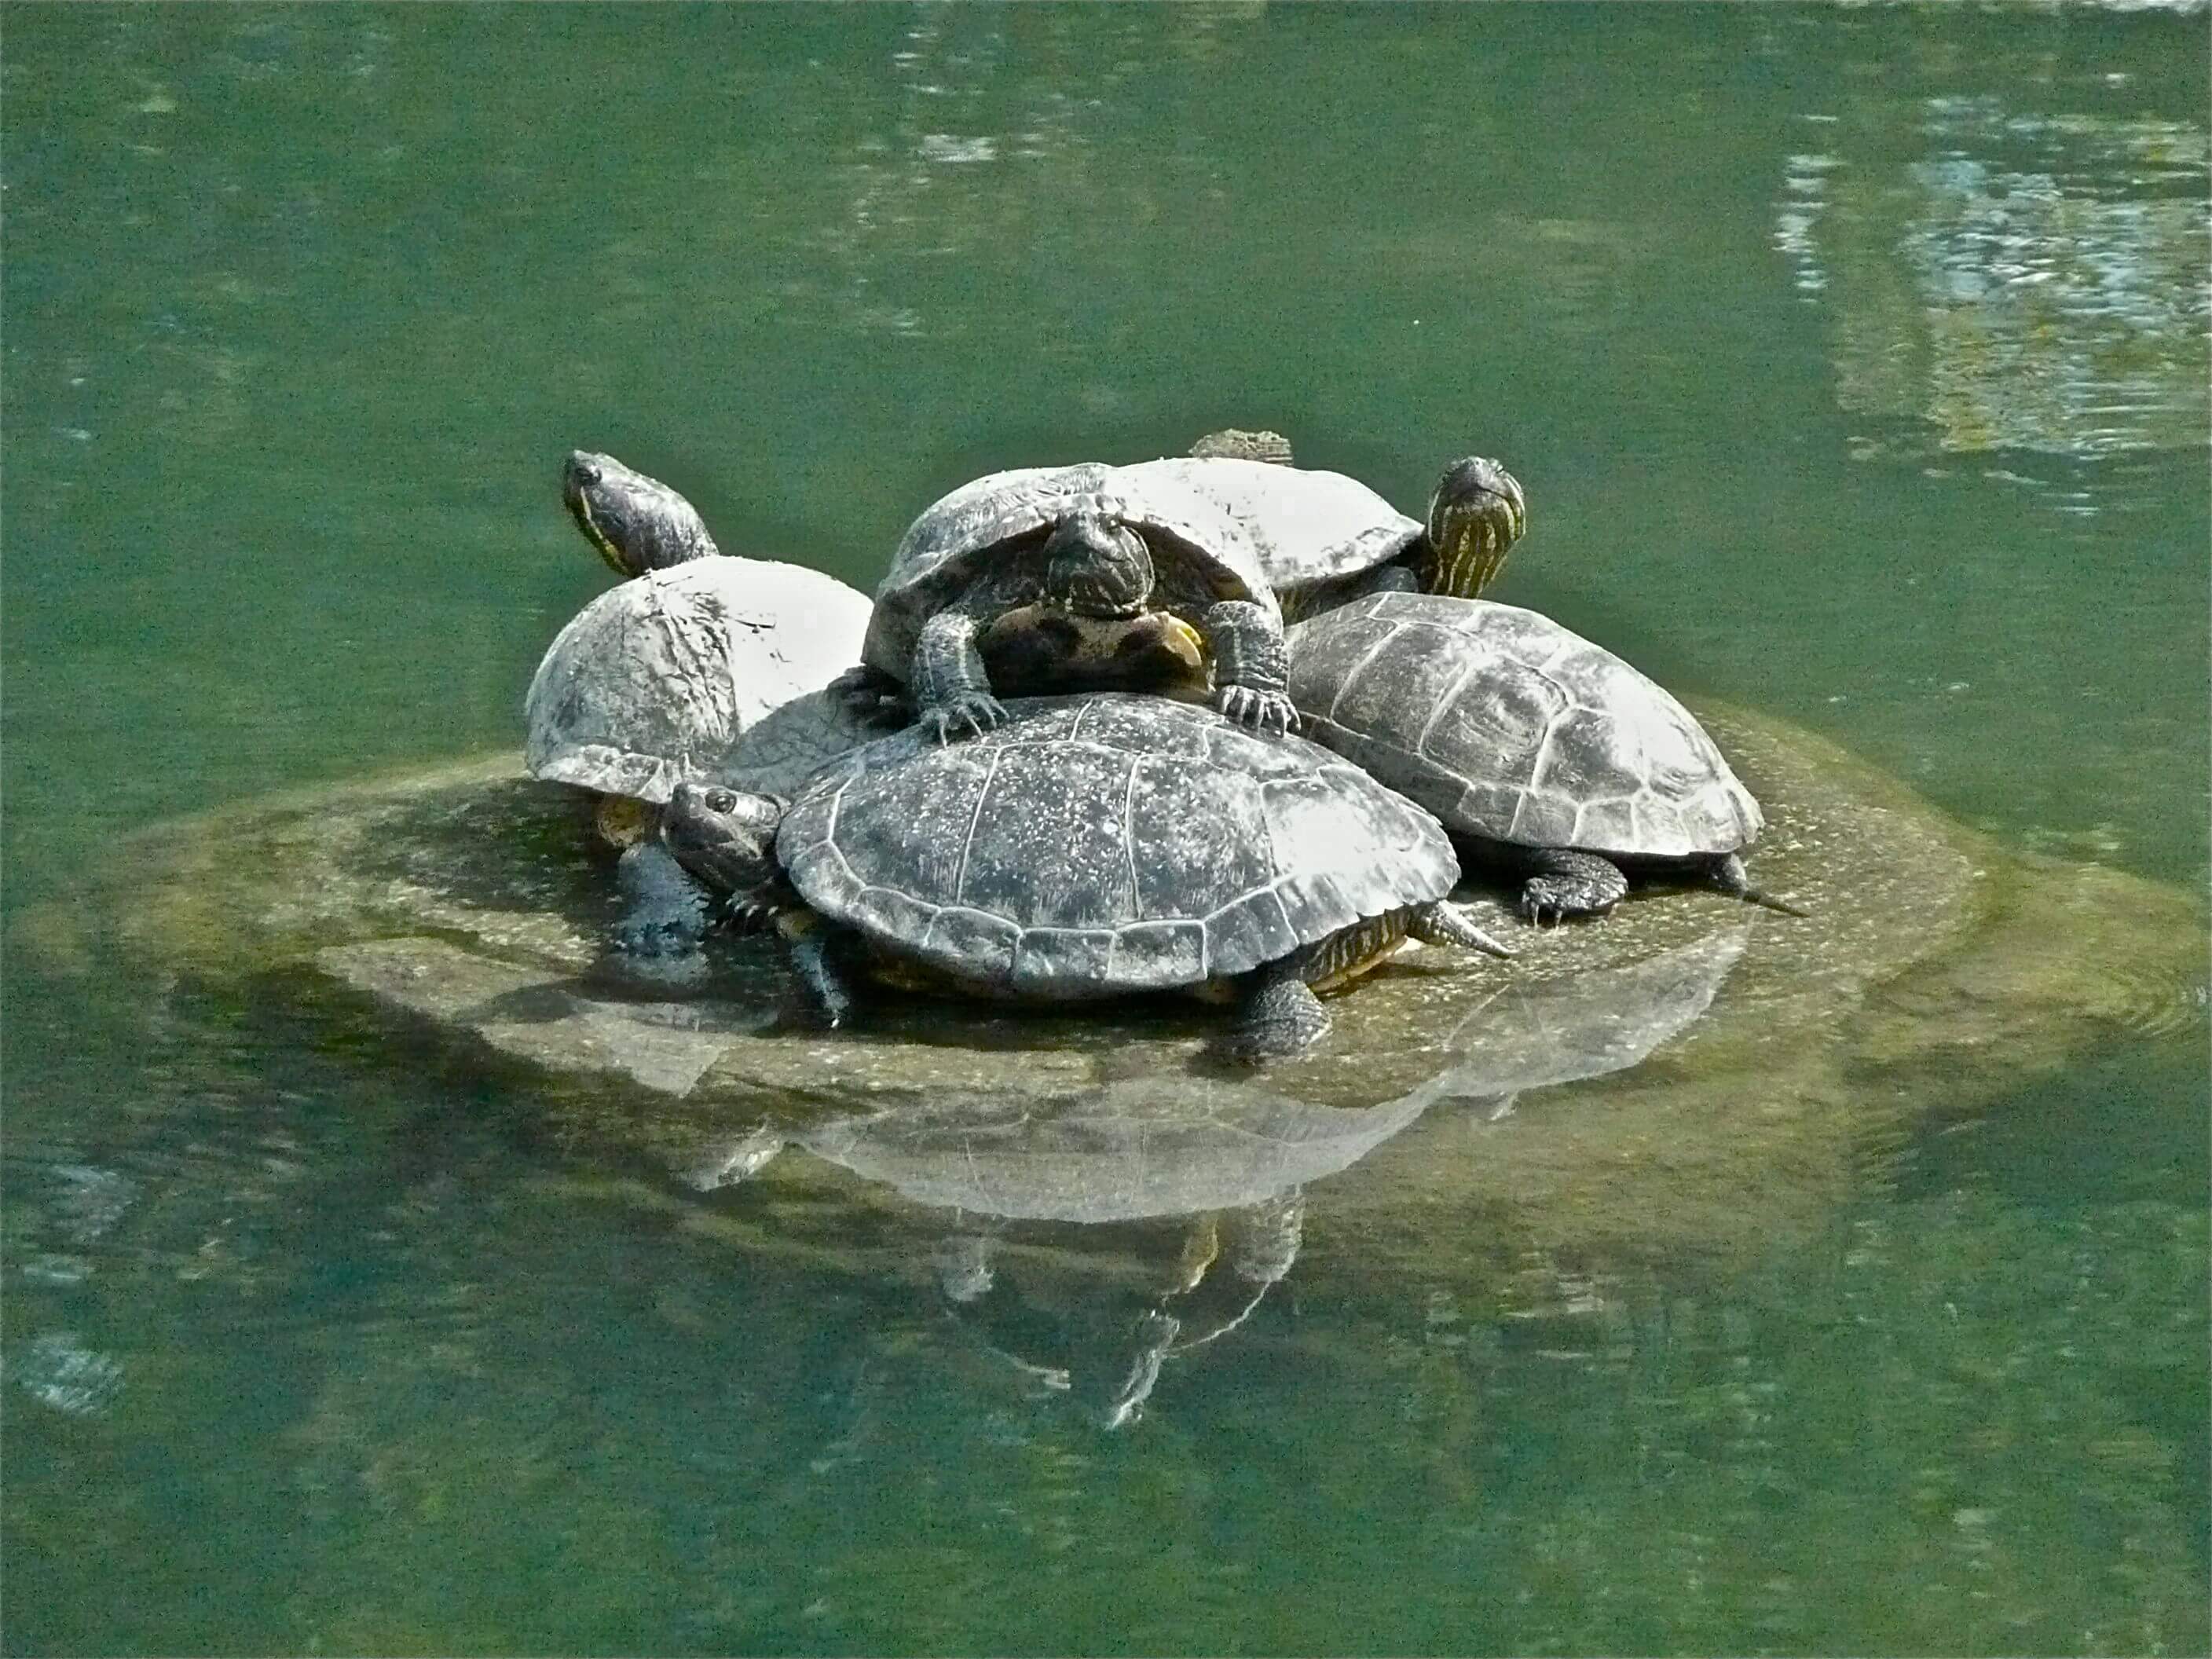 Roundup - The Best Turtle Dock for Large Turtles | TurtleHolic